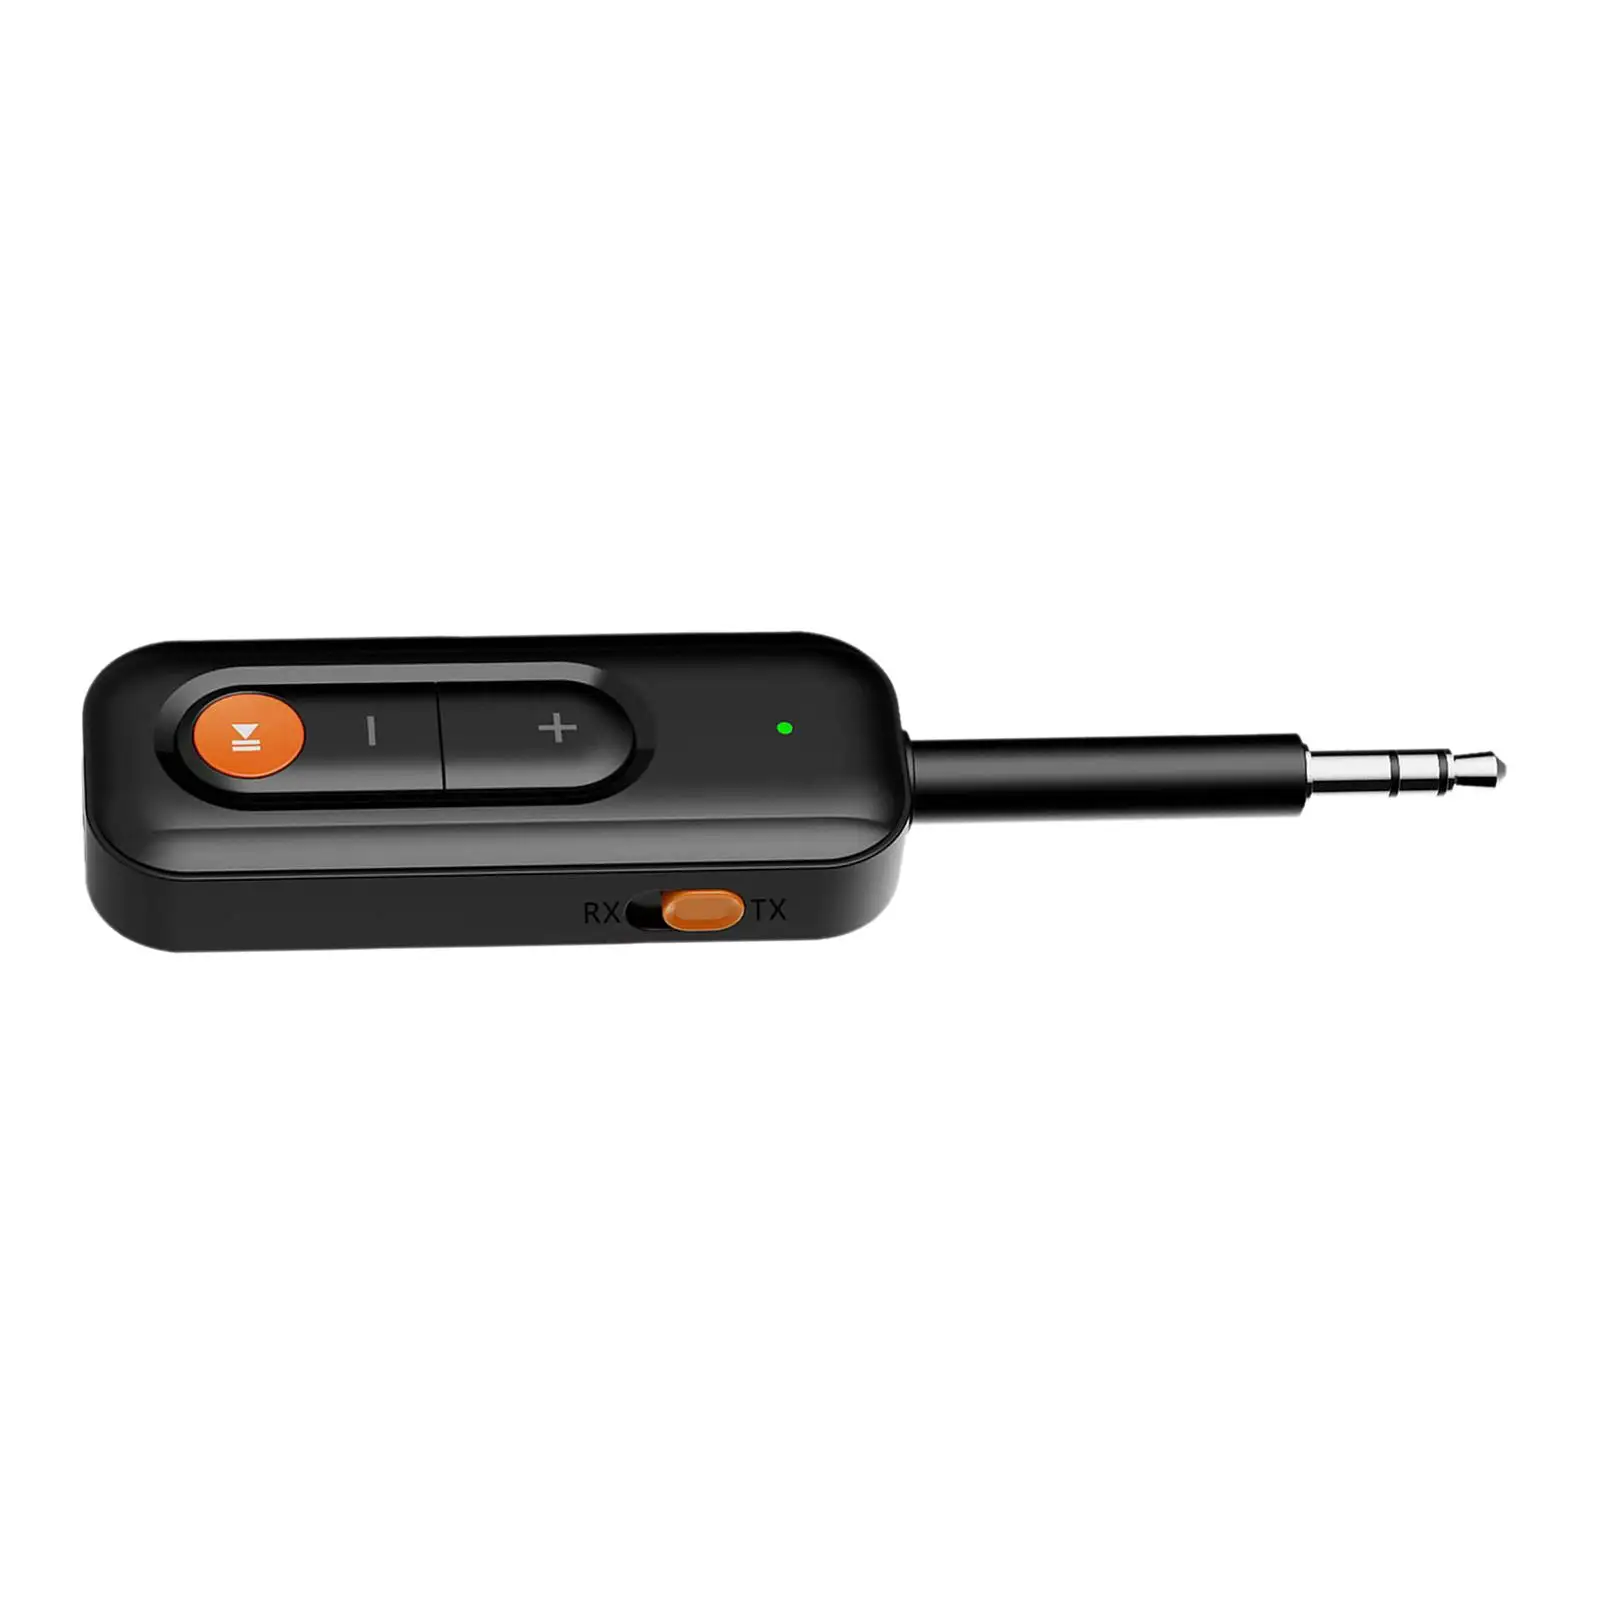 Audio Transmitter and Receiver Transceiver Universal Support Dual Devices Simultaneously for Earphones Car Stereo PC Speakers